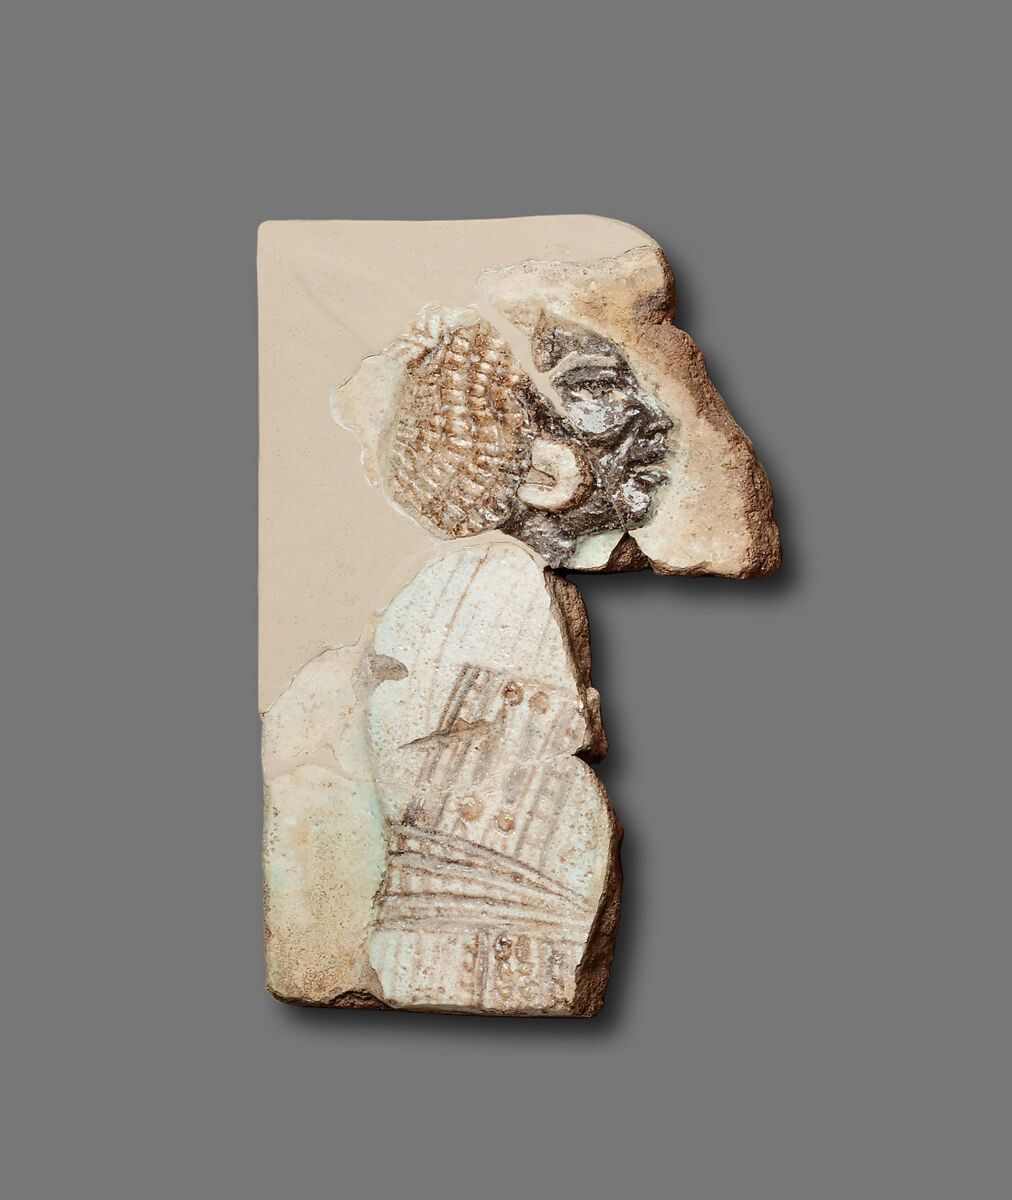 Tile from walls of Throne Room in the palace of Ramesses II, Faience 